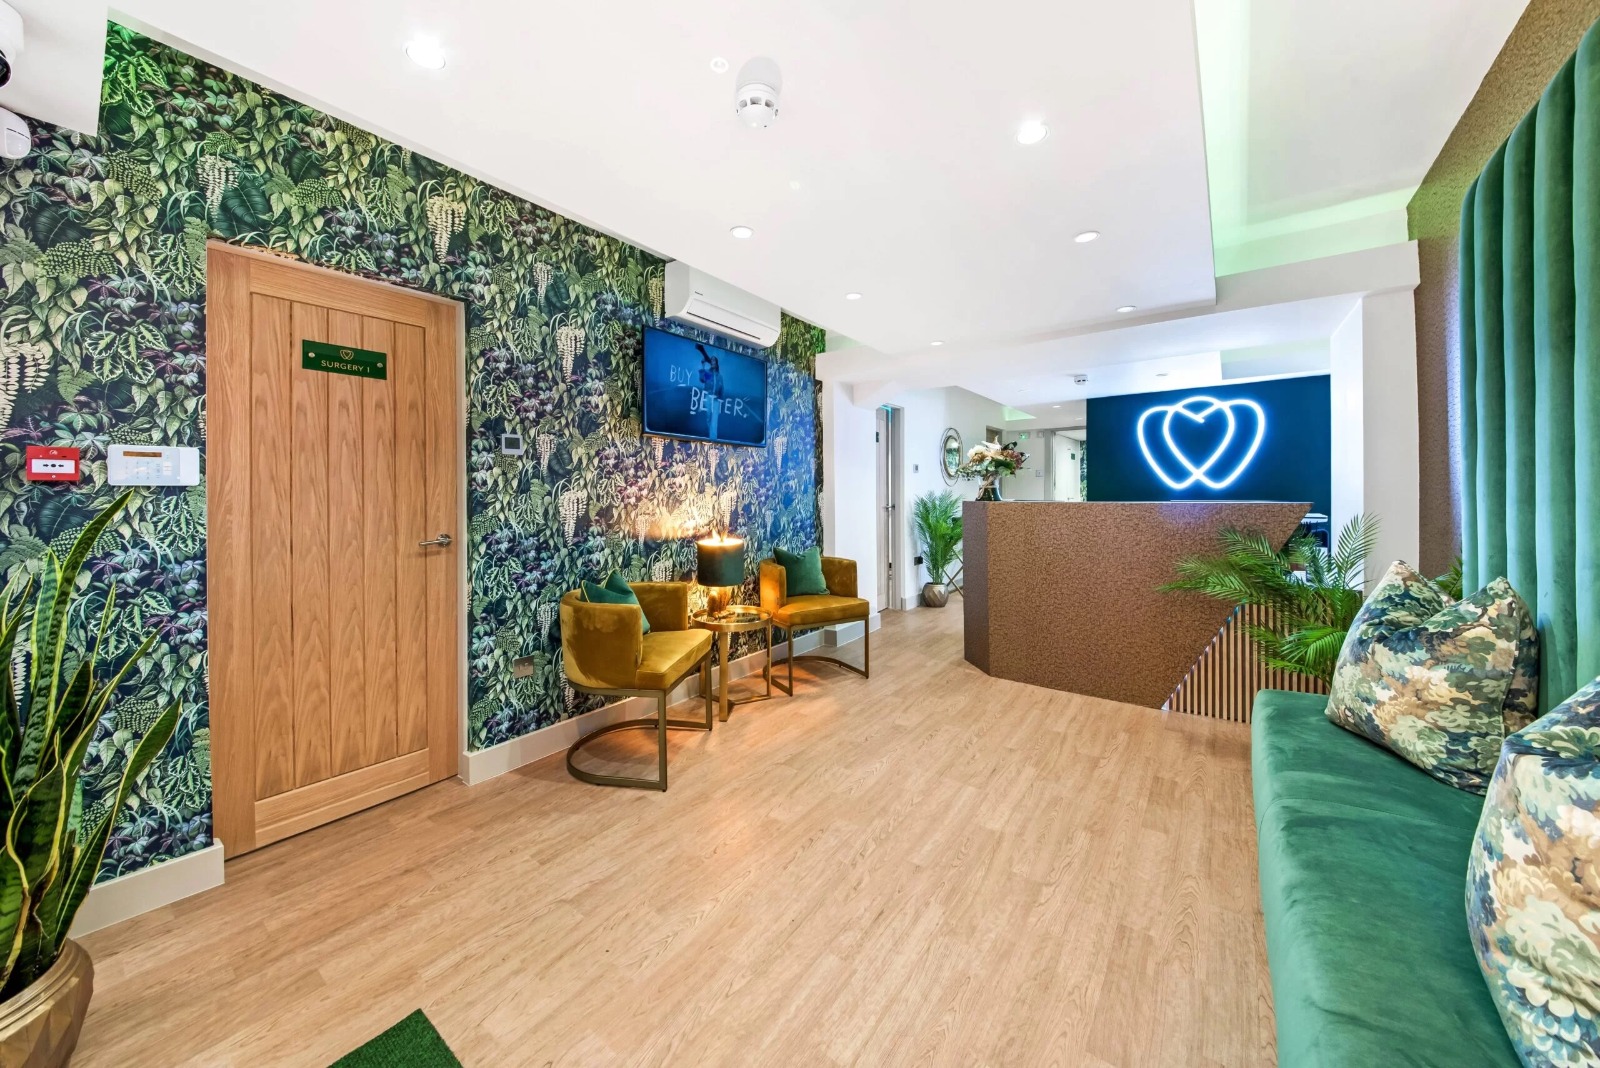 5 Essentials to Consider When Redesigning Your Dental Practice